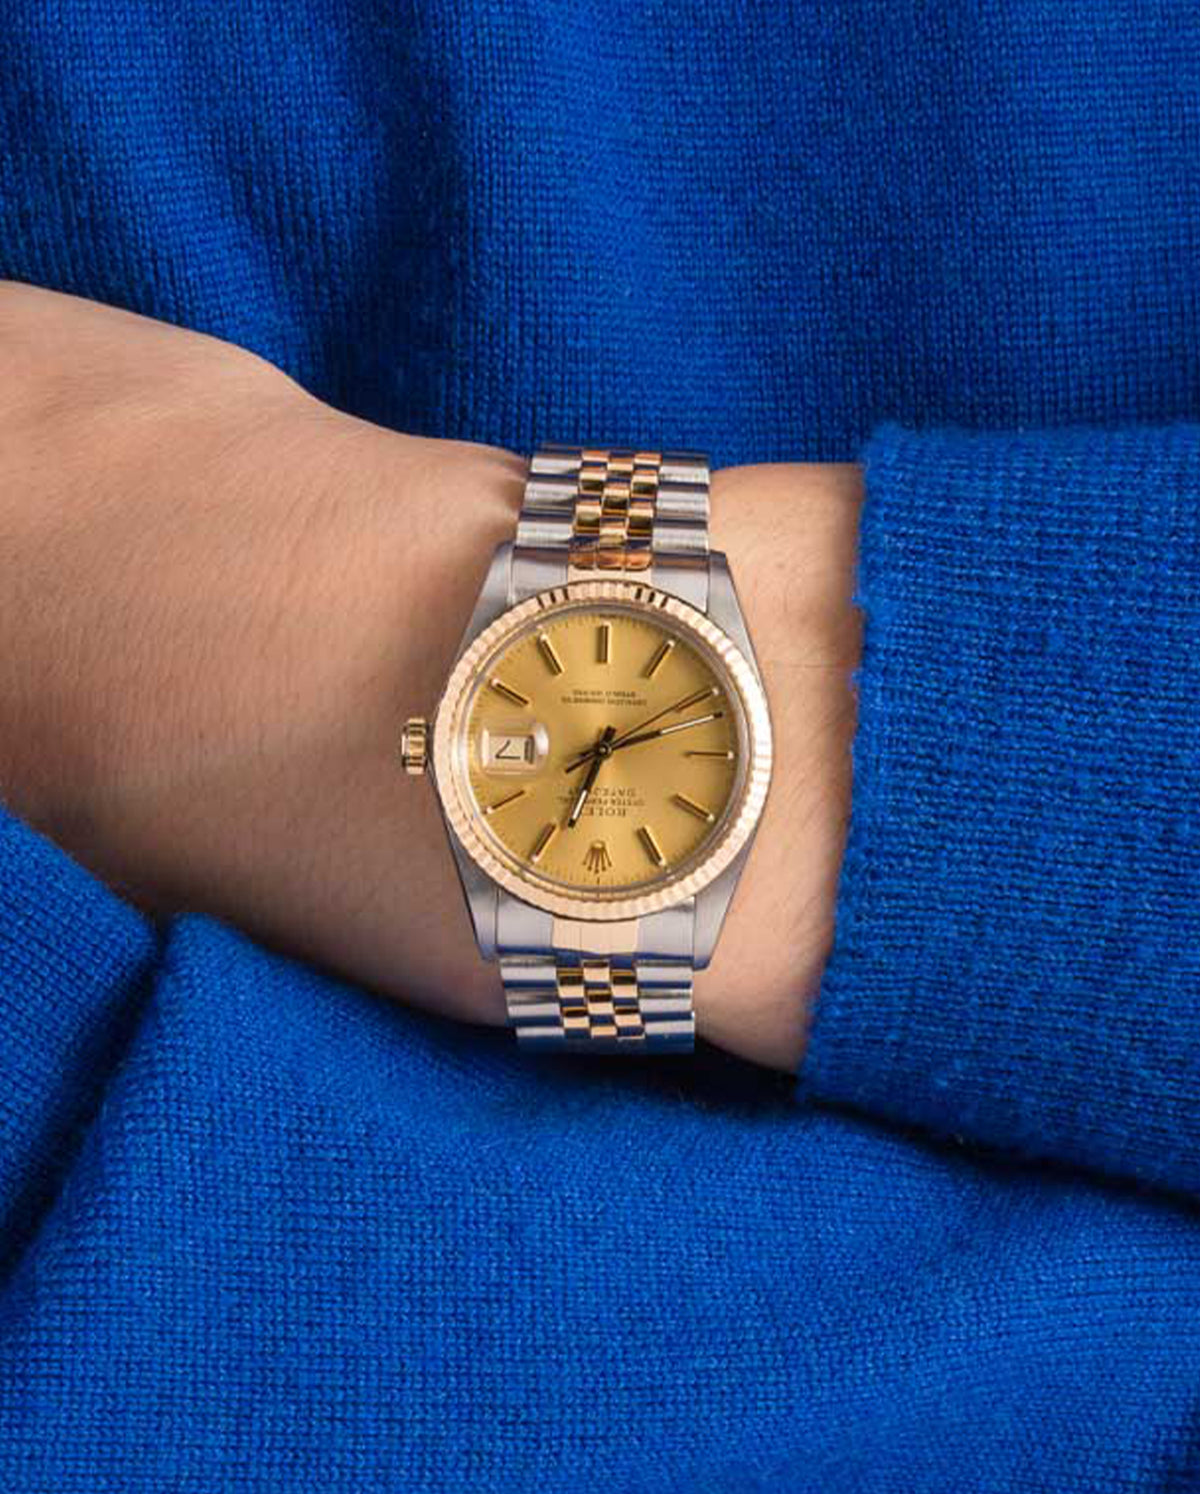 Rolex Datejust Yellow Gold/Stainless Steel 1986